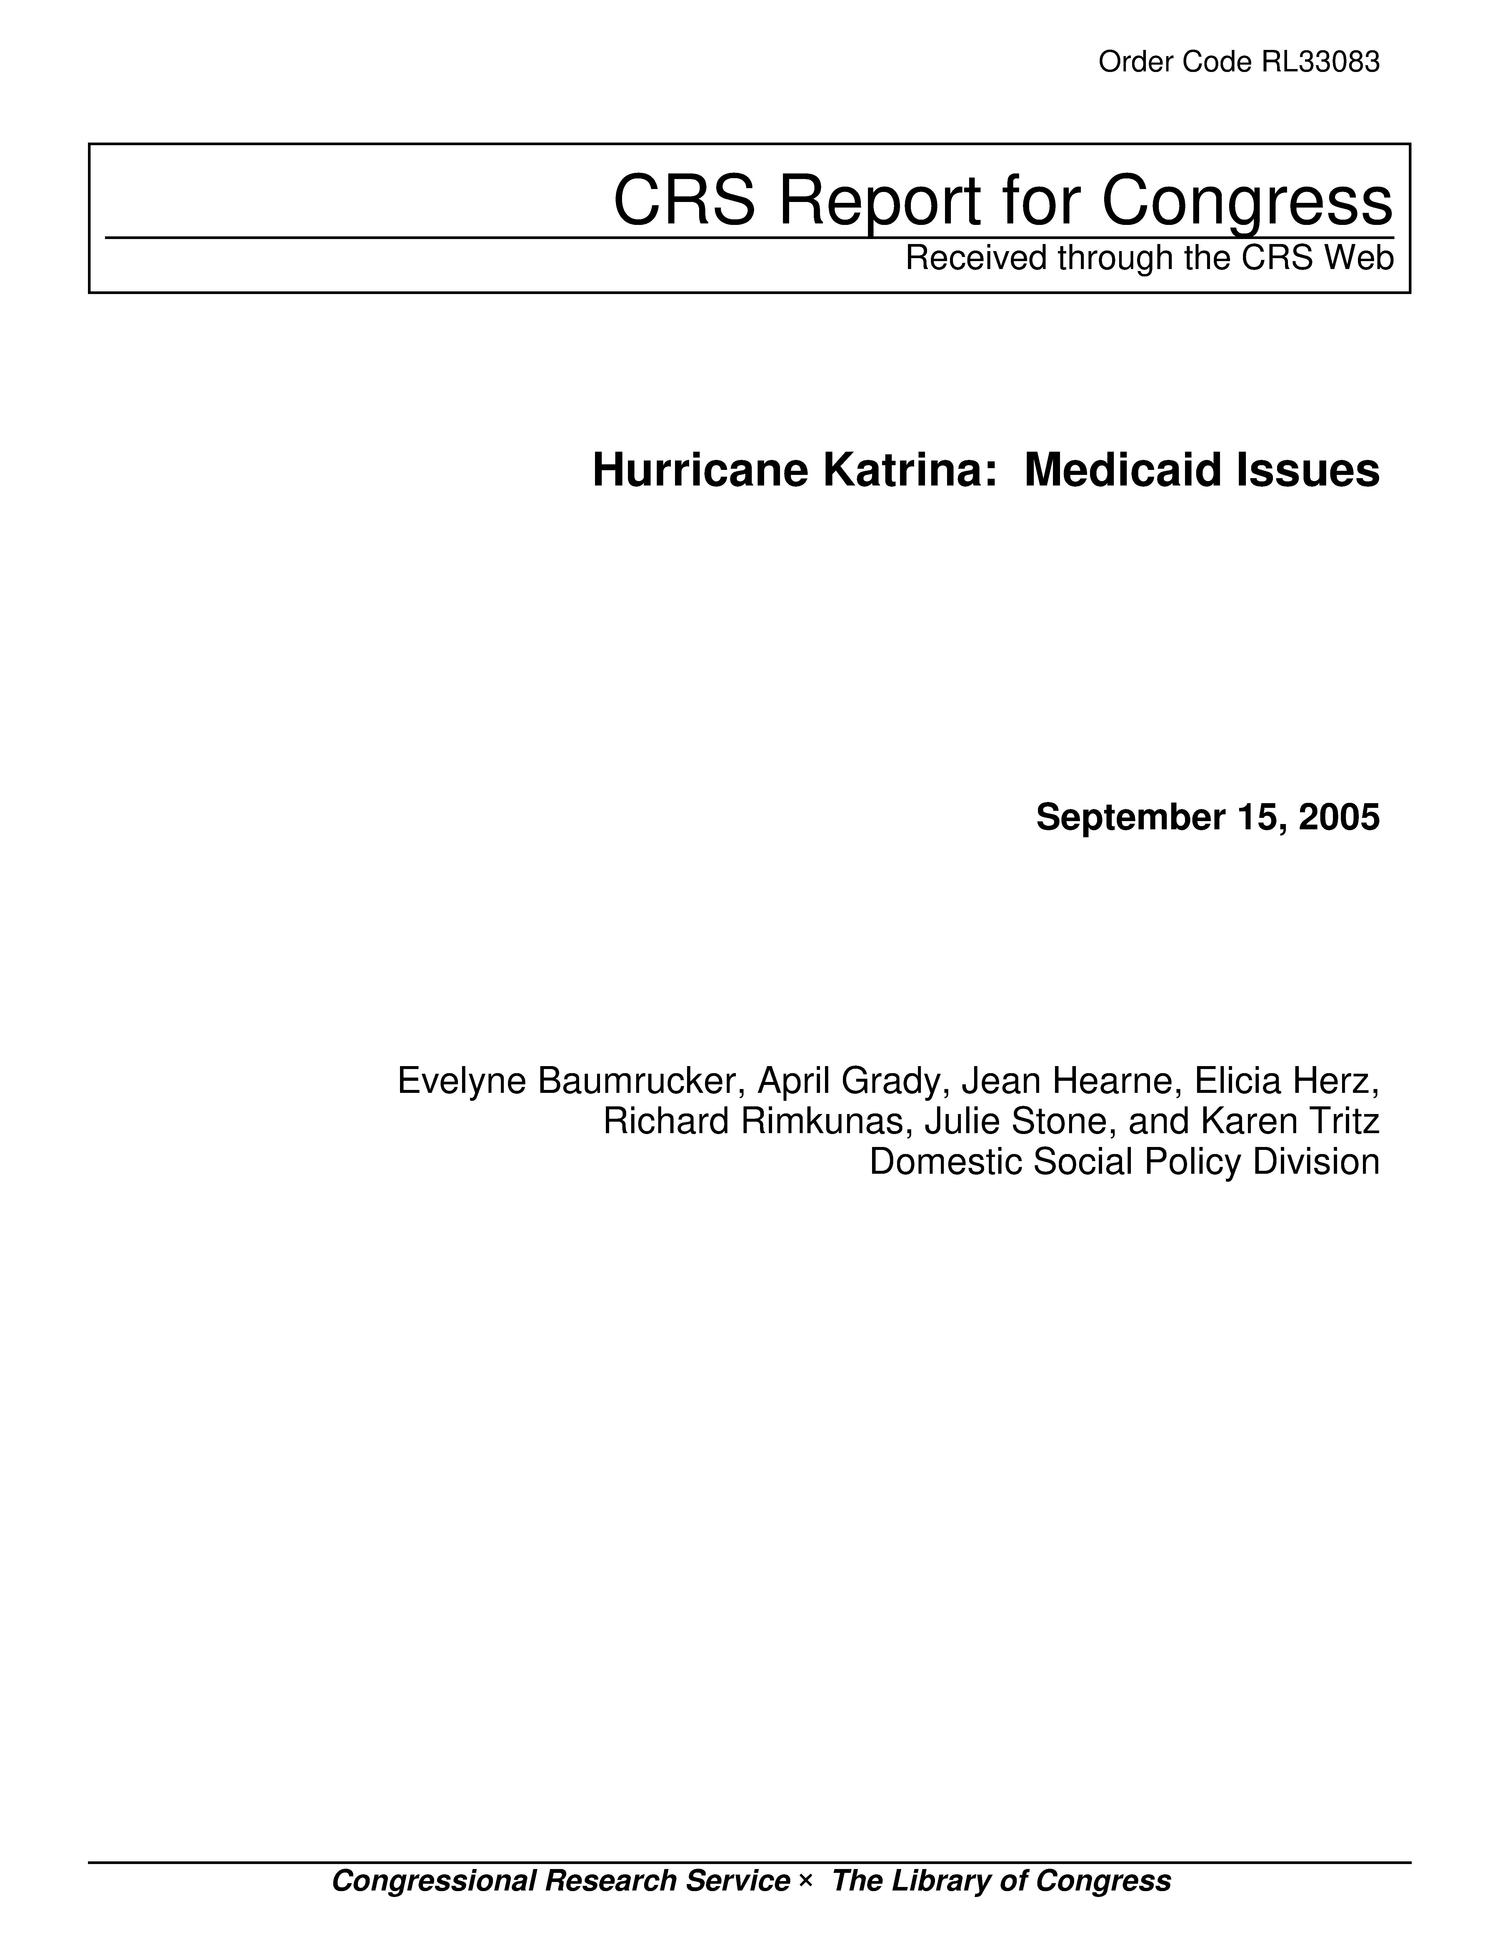 Hurricane Katrina: Medicaid Issues
                                                
                                                    [Sequence #]: 1 of 25
                                                